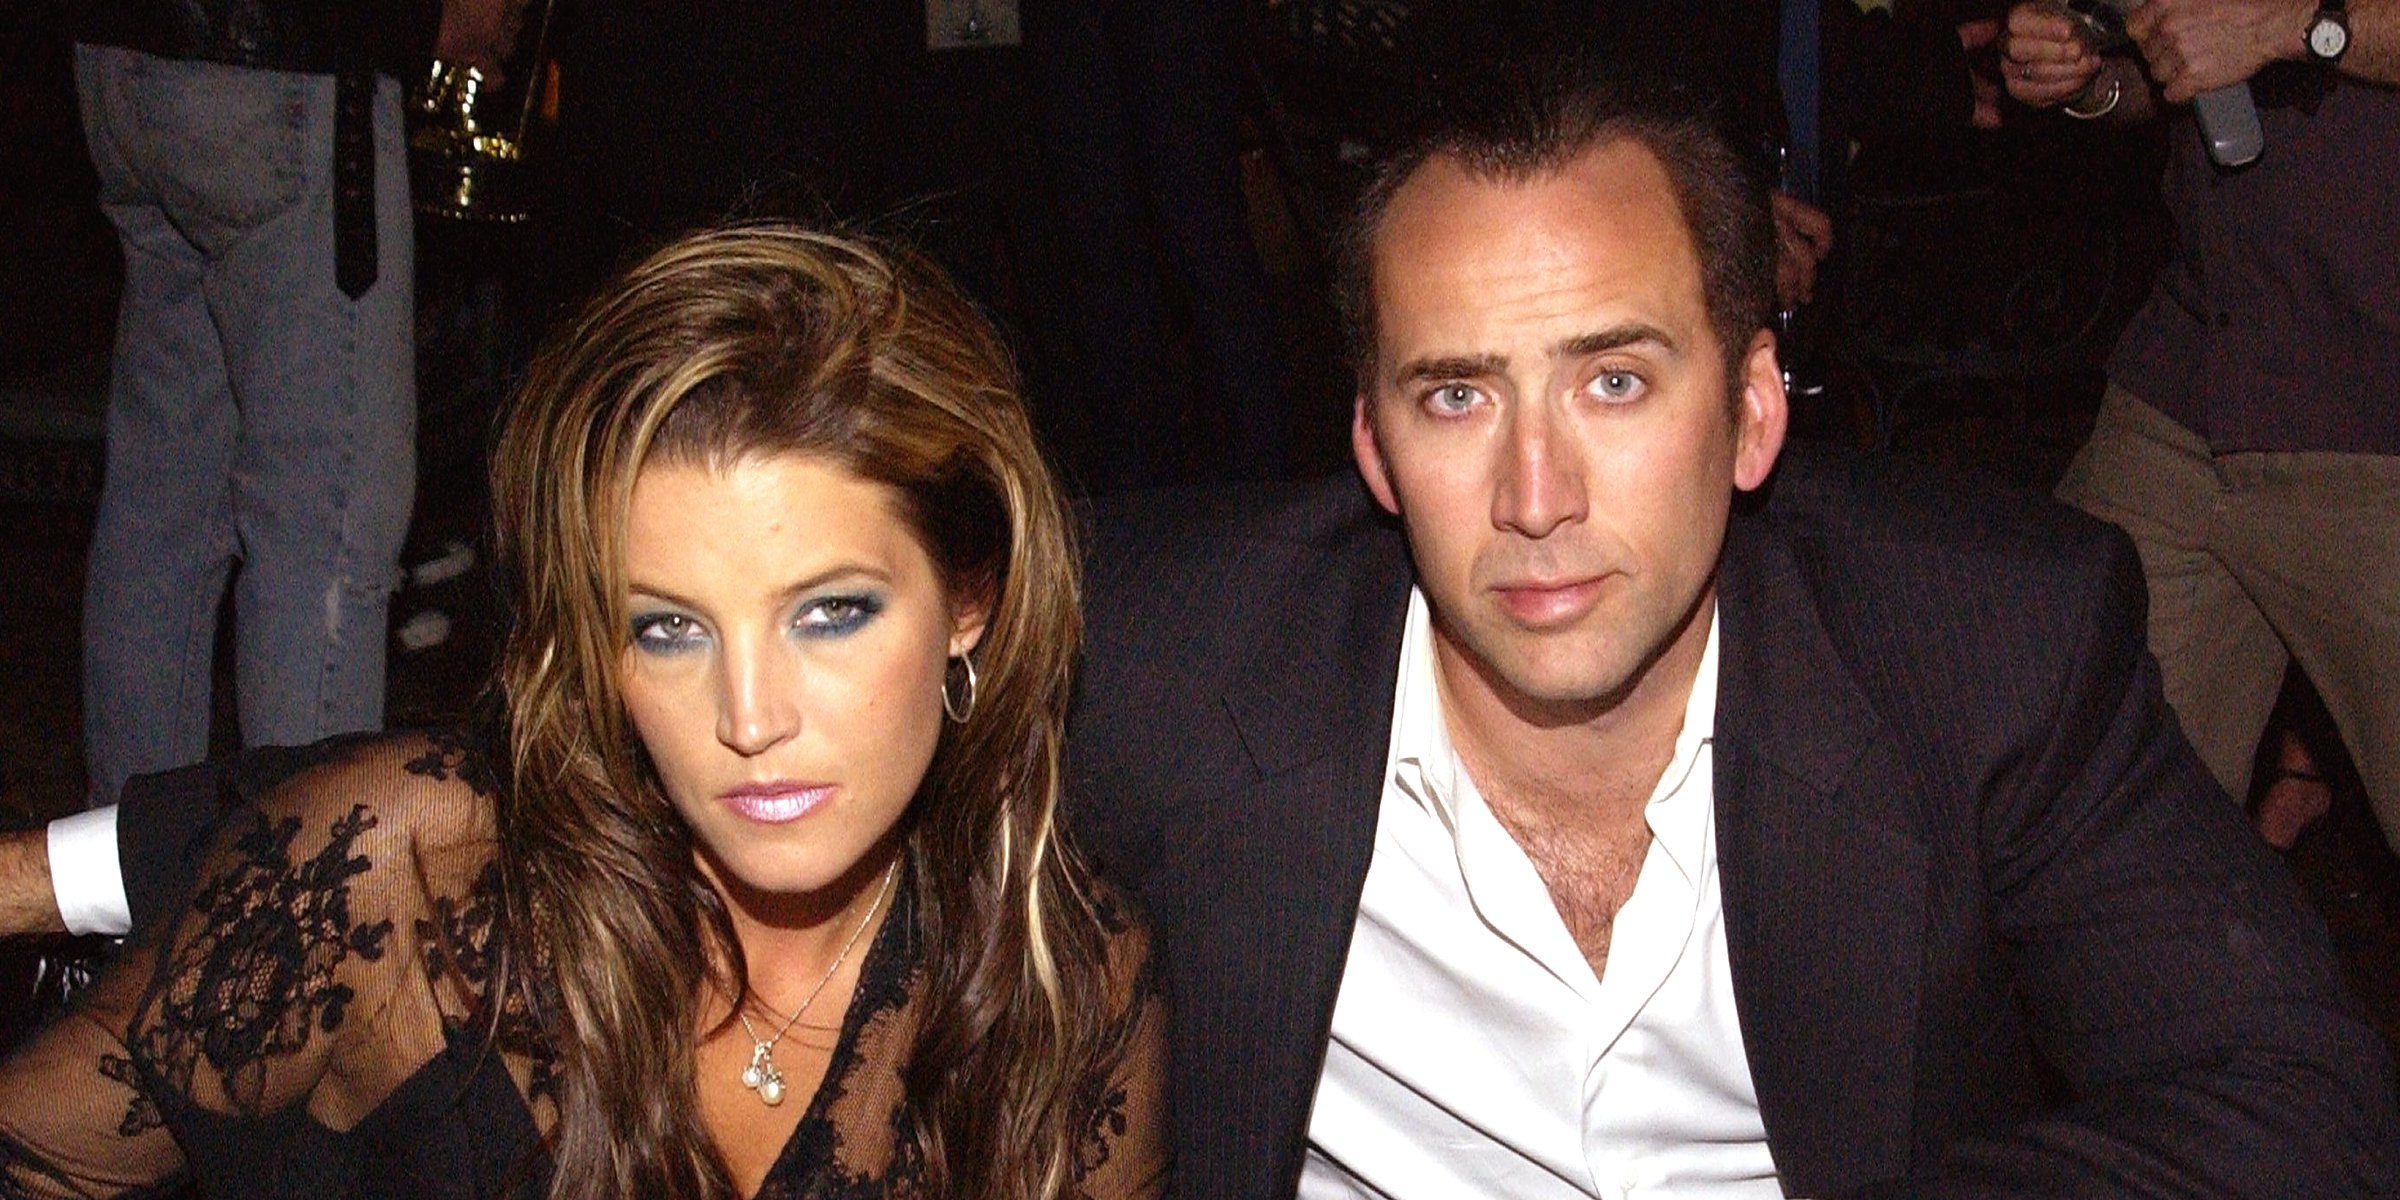 Lisa Marie Presley and Nicolas Cage | Source: Getty Images